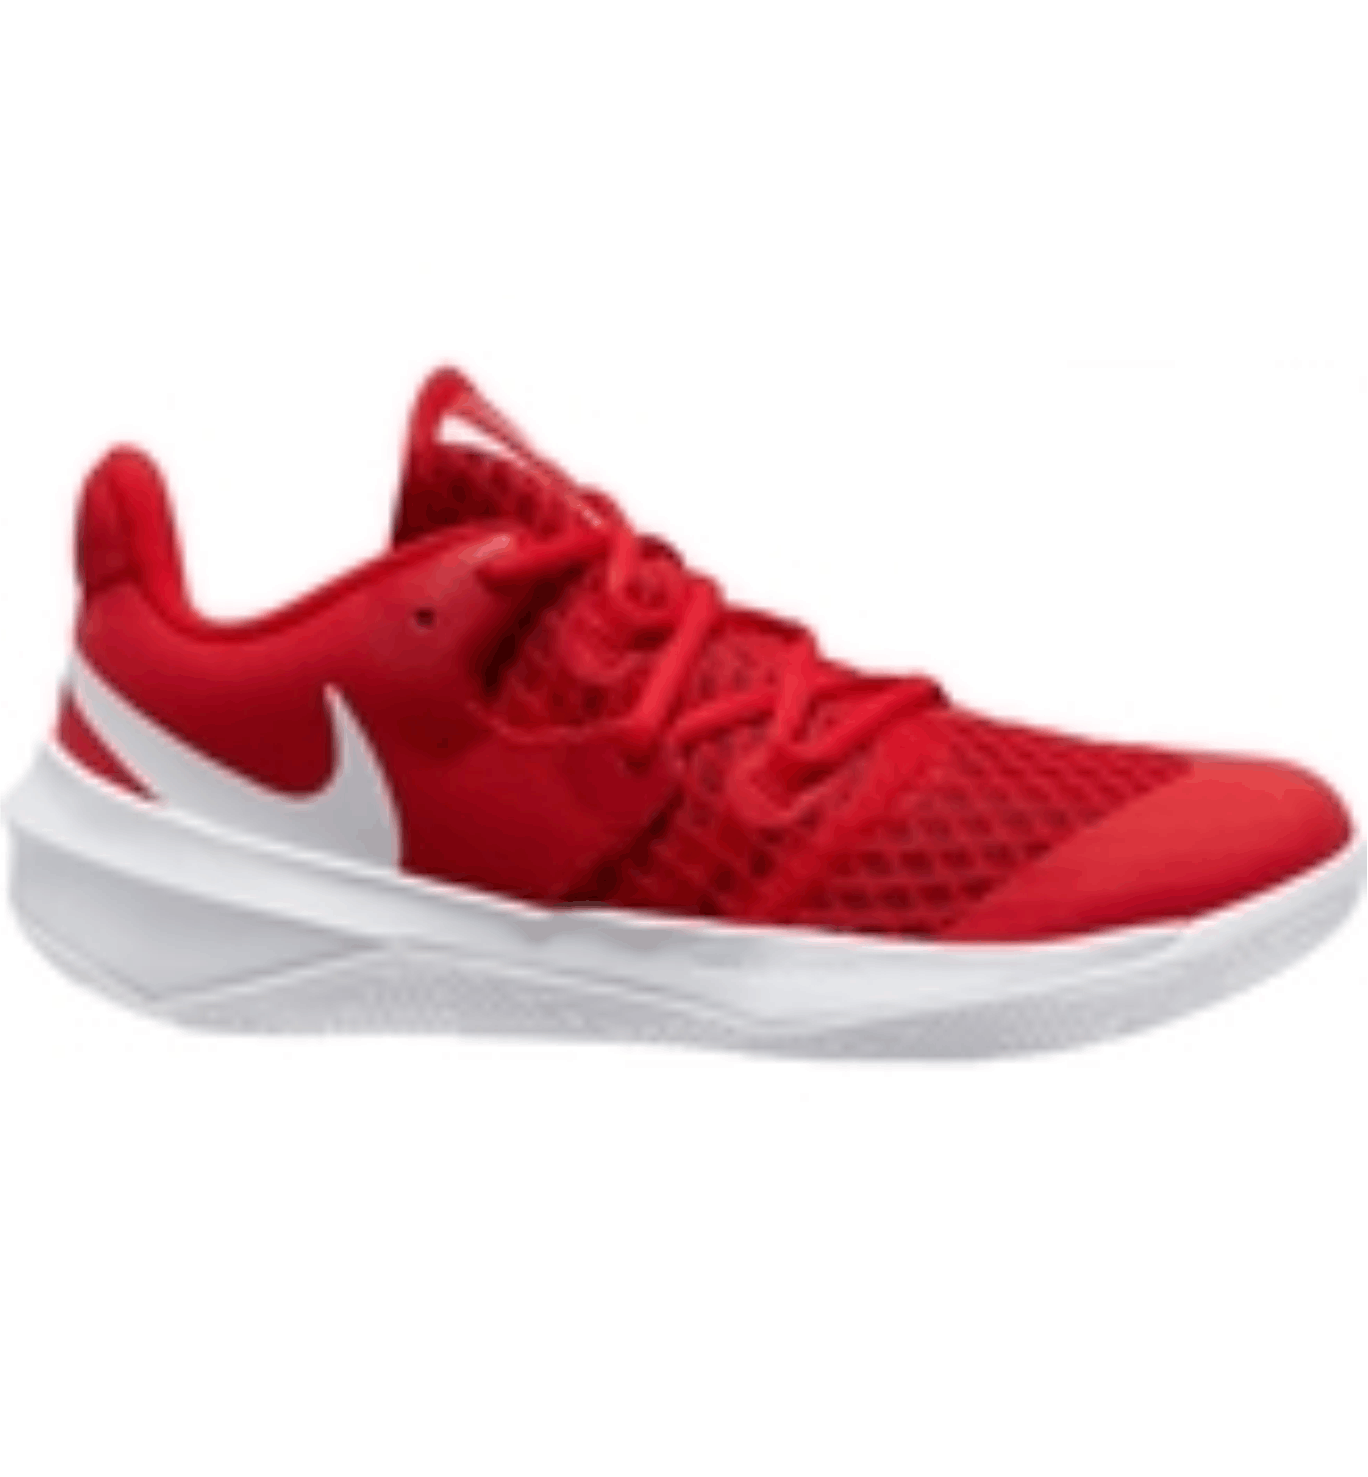 Nike Women's Court HyperSpeed Volleyball Shoe Midwest Volleyball ...